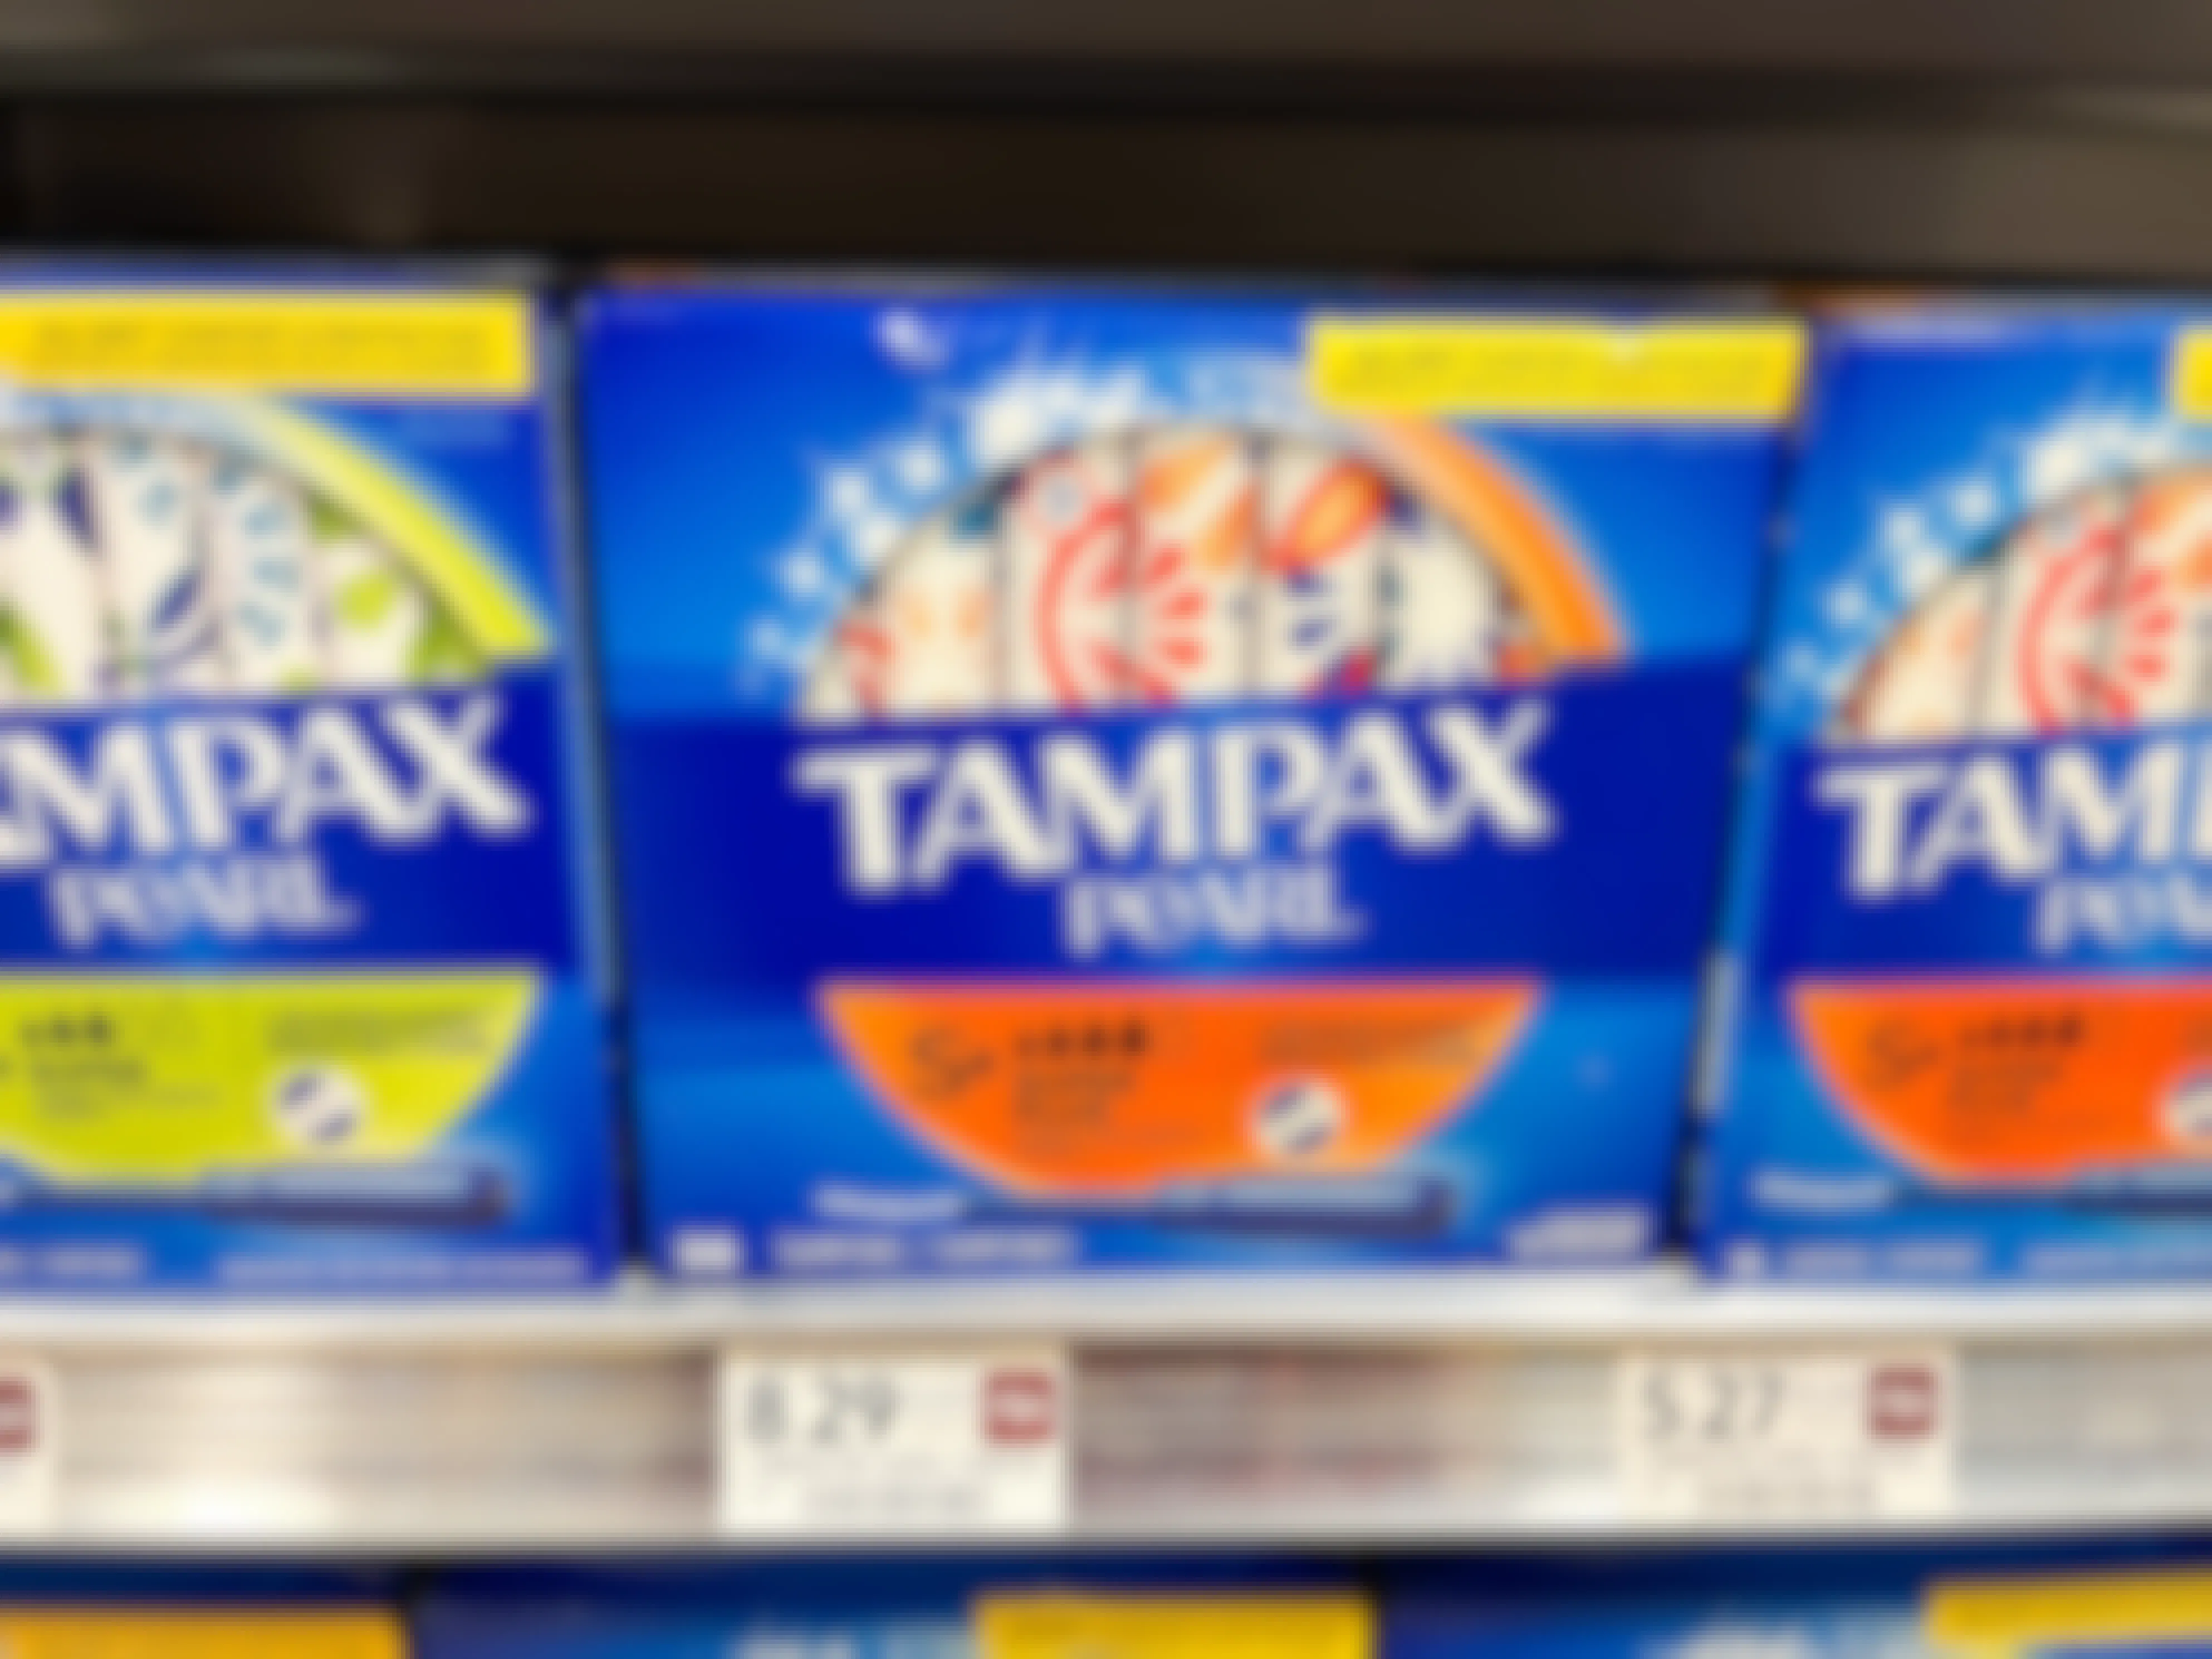 Boxes of Tampax Pearl tampons stocked on a shelf at Publix.